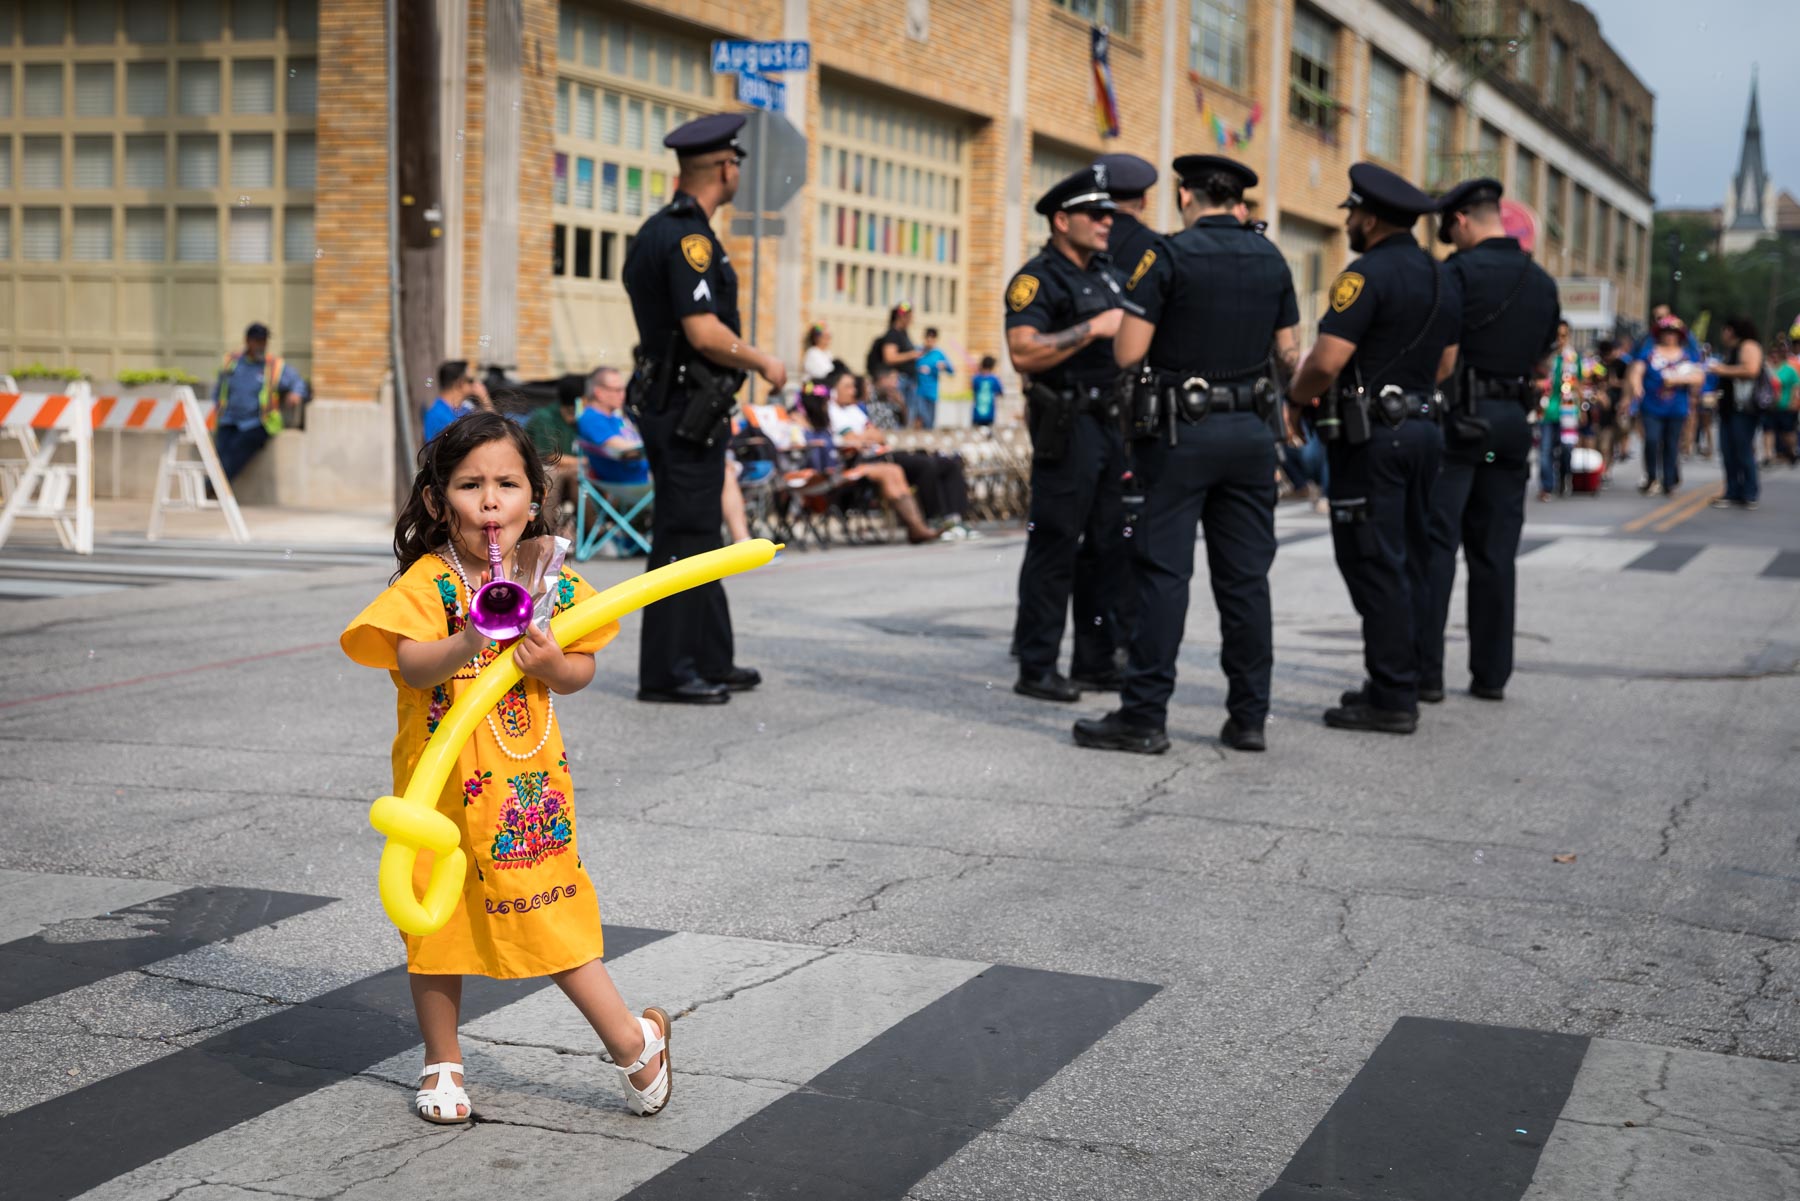 Little girl in yellow dress blowing toy horn and holding yellow balloon in front of cops for an article on the Fiesta photo tips